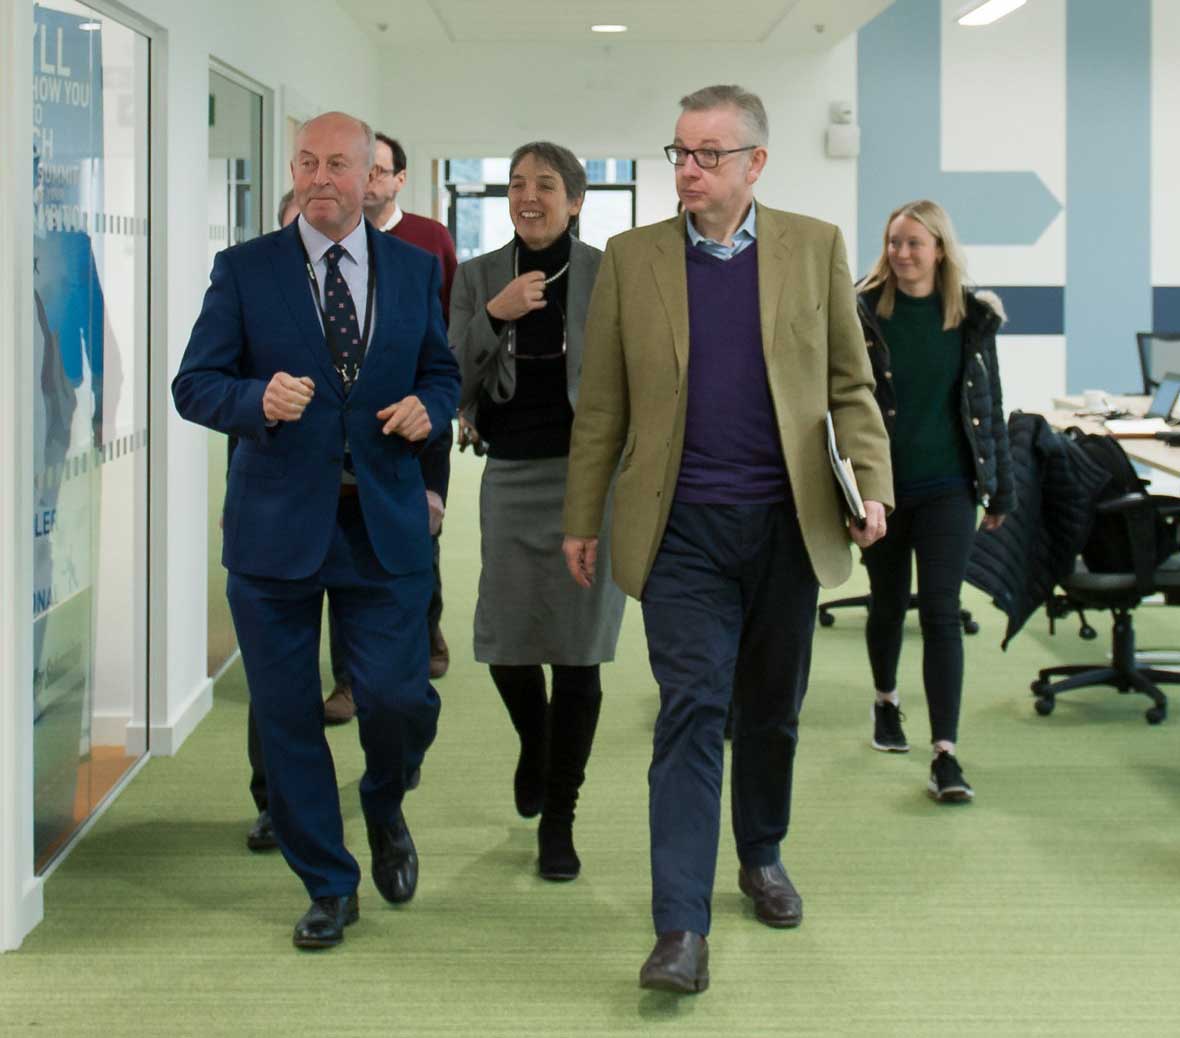 Michel Gove MP visiting the Growth Hub